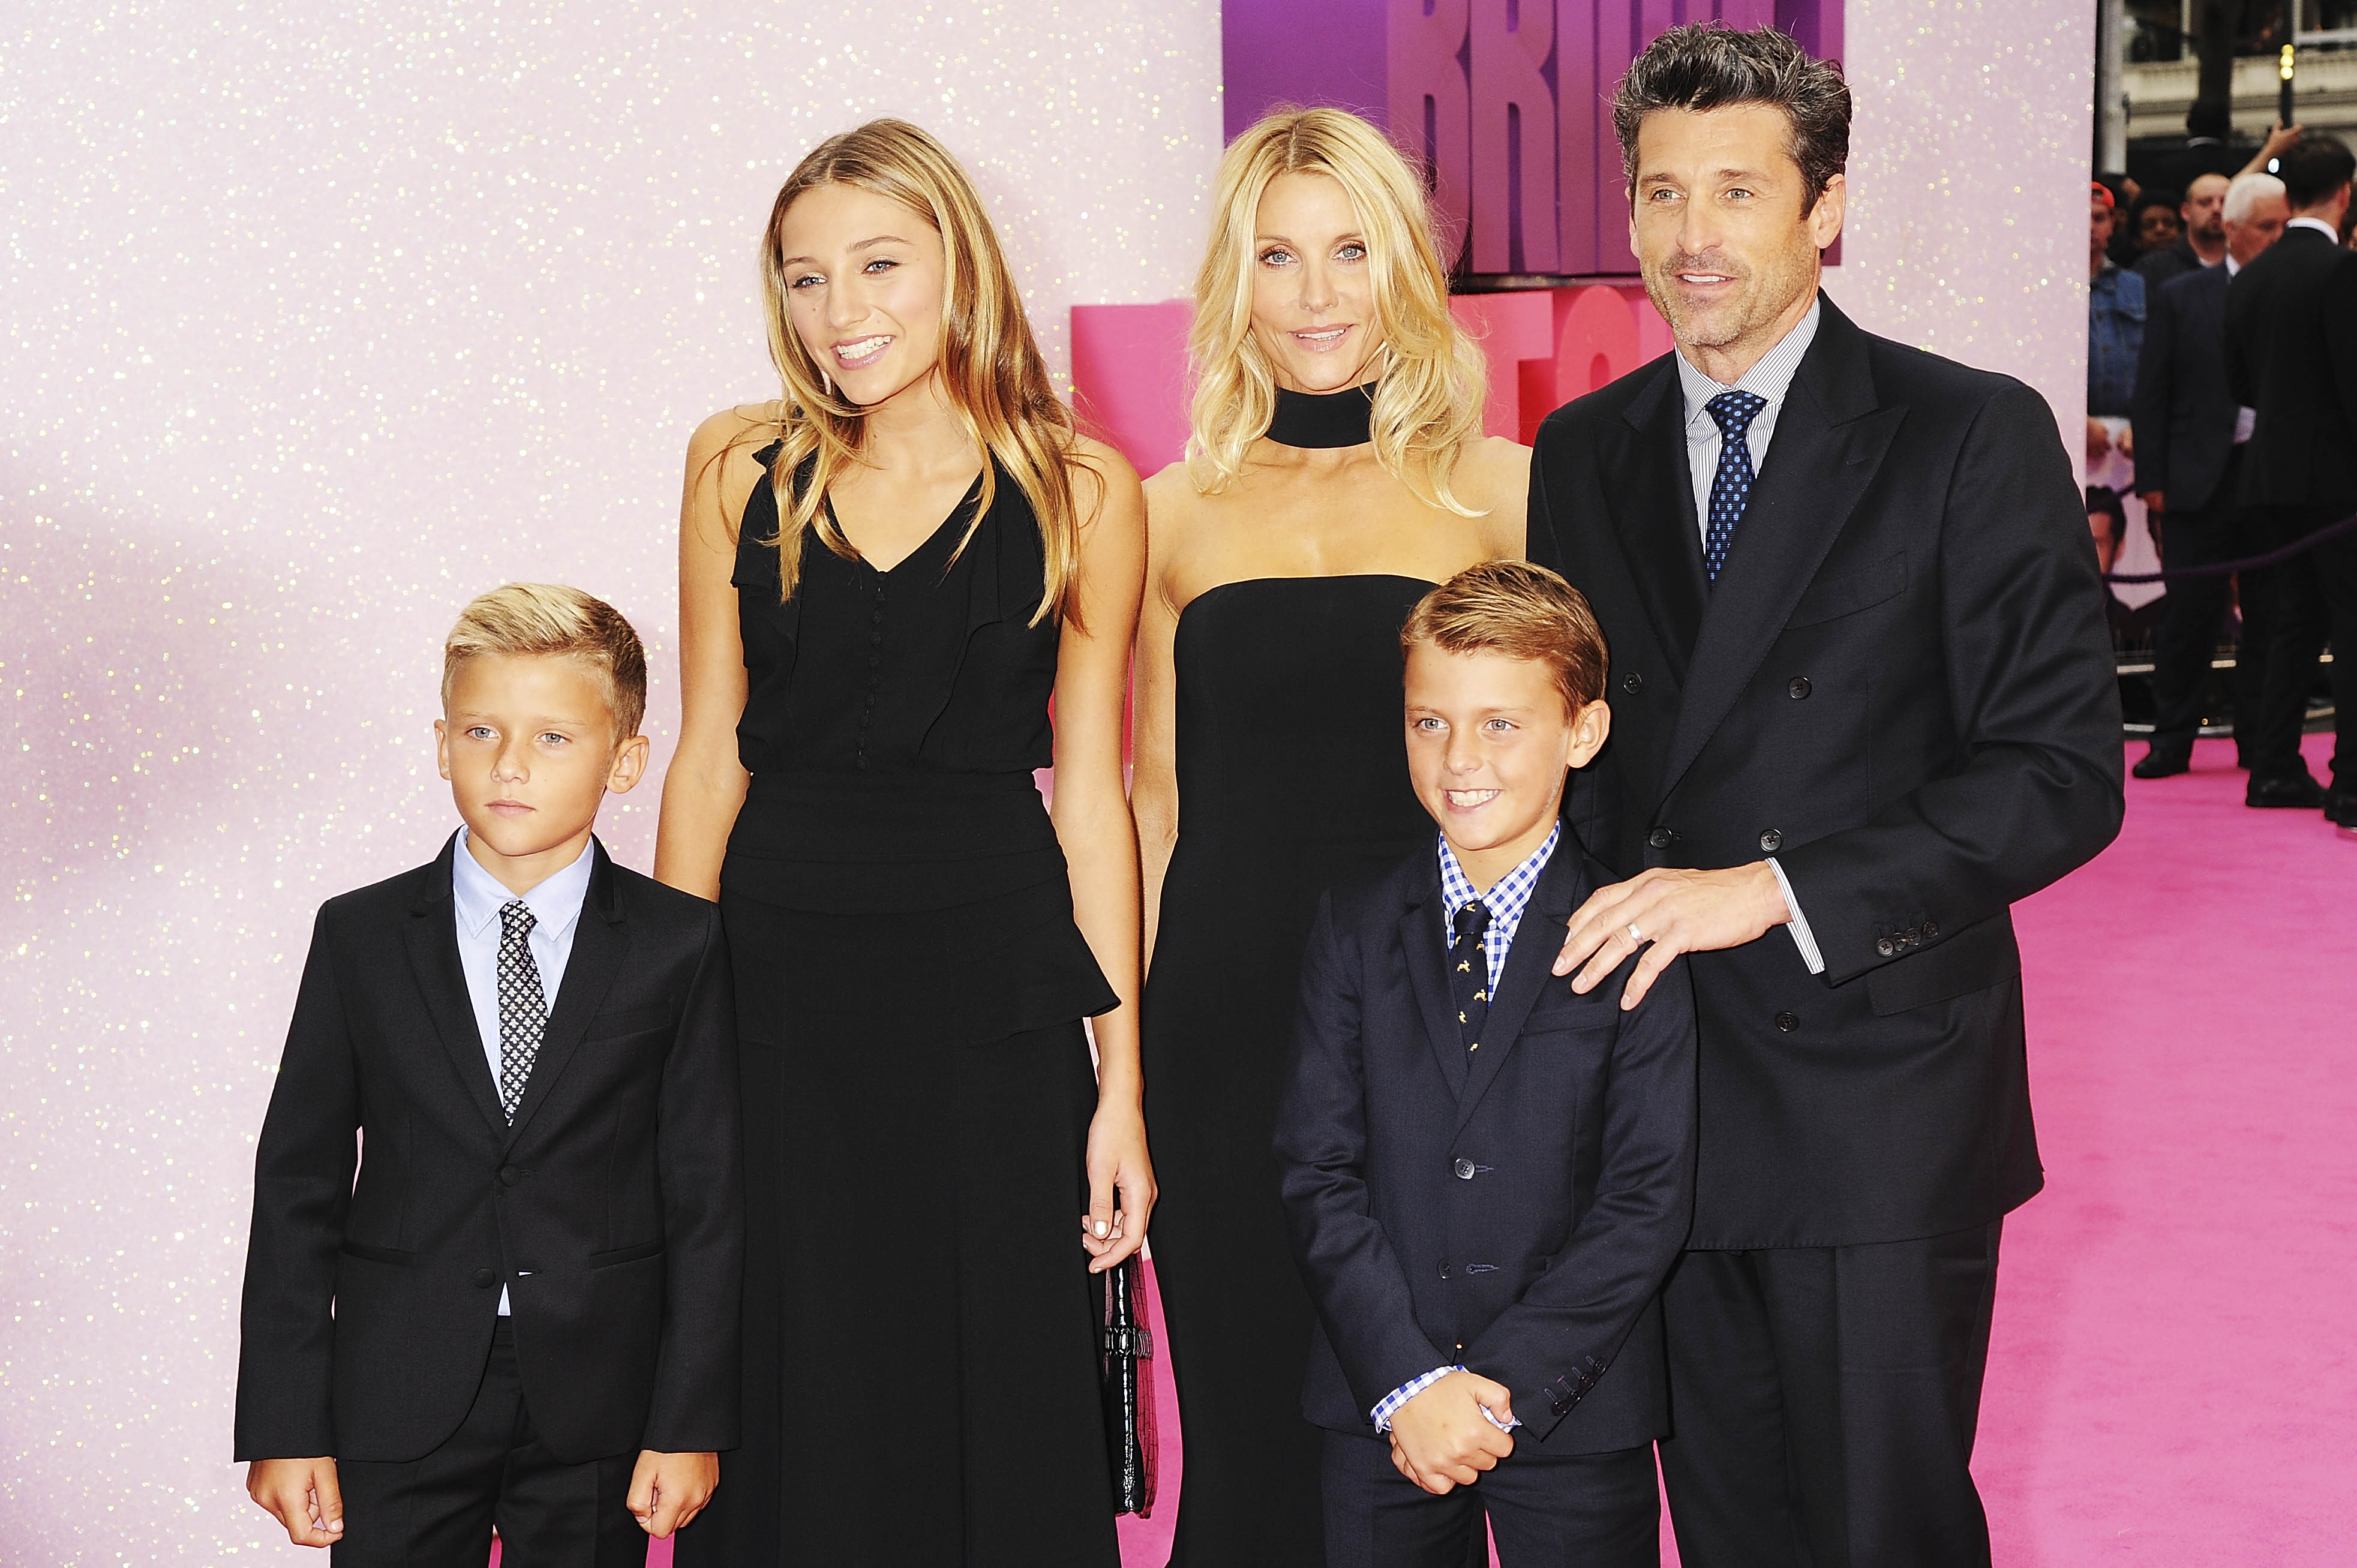 Patrick Dempsey, Jillian Fink, and their kids, Talula, Darby and Sullivan Dempsey at the world premiere for "Bridget Jones's Baby" in London, 2016 | Source: Getty Images